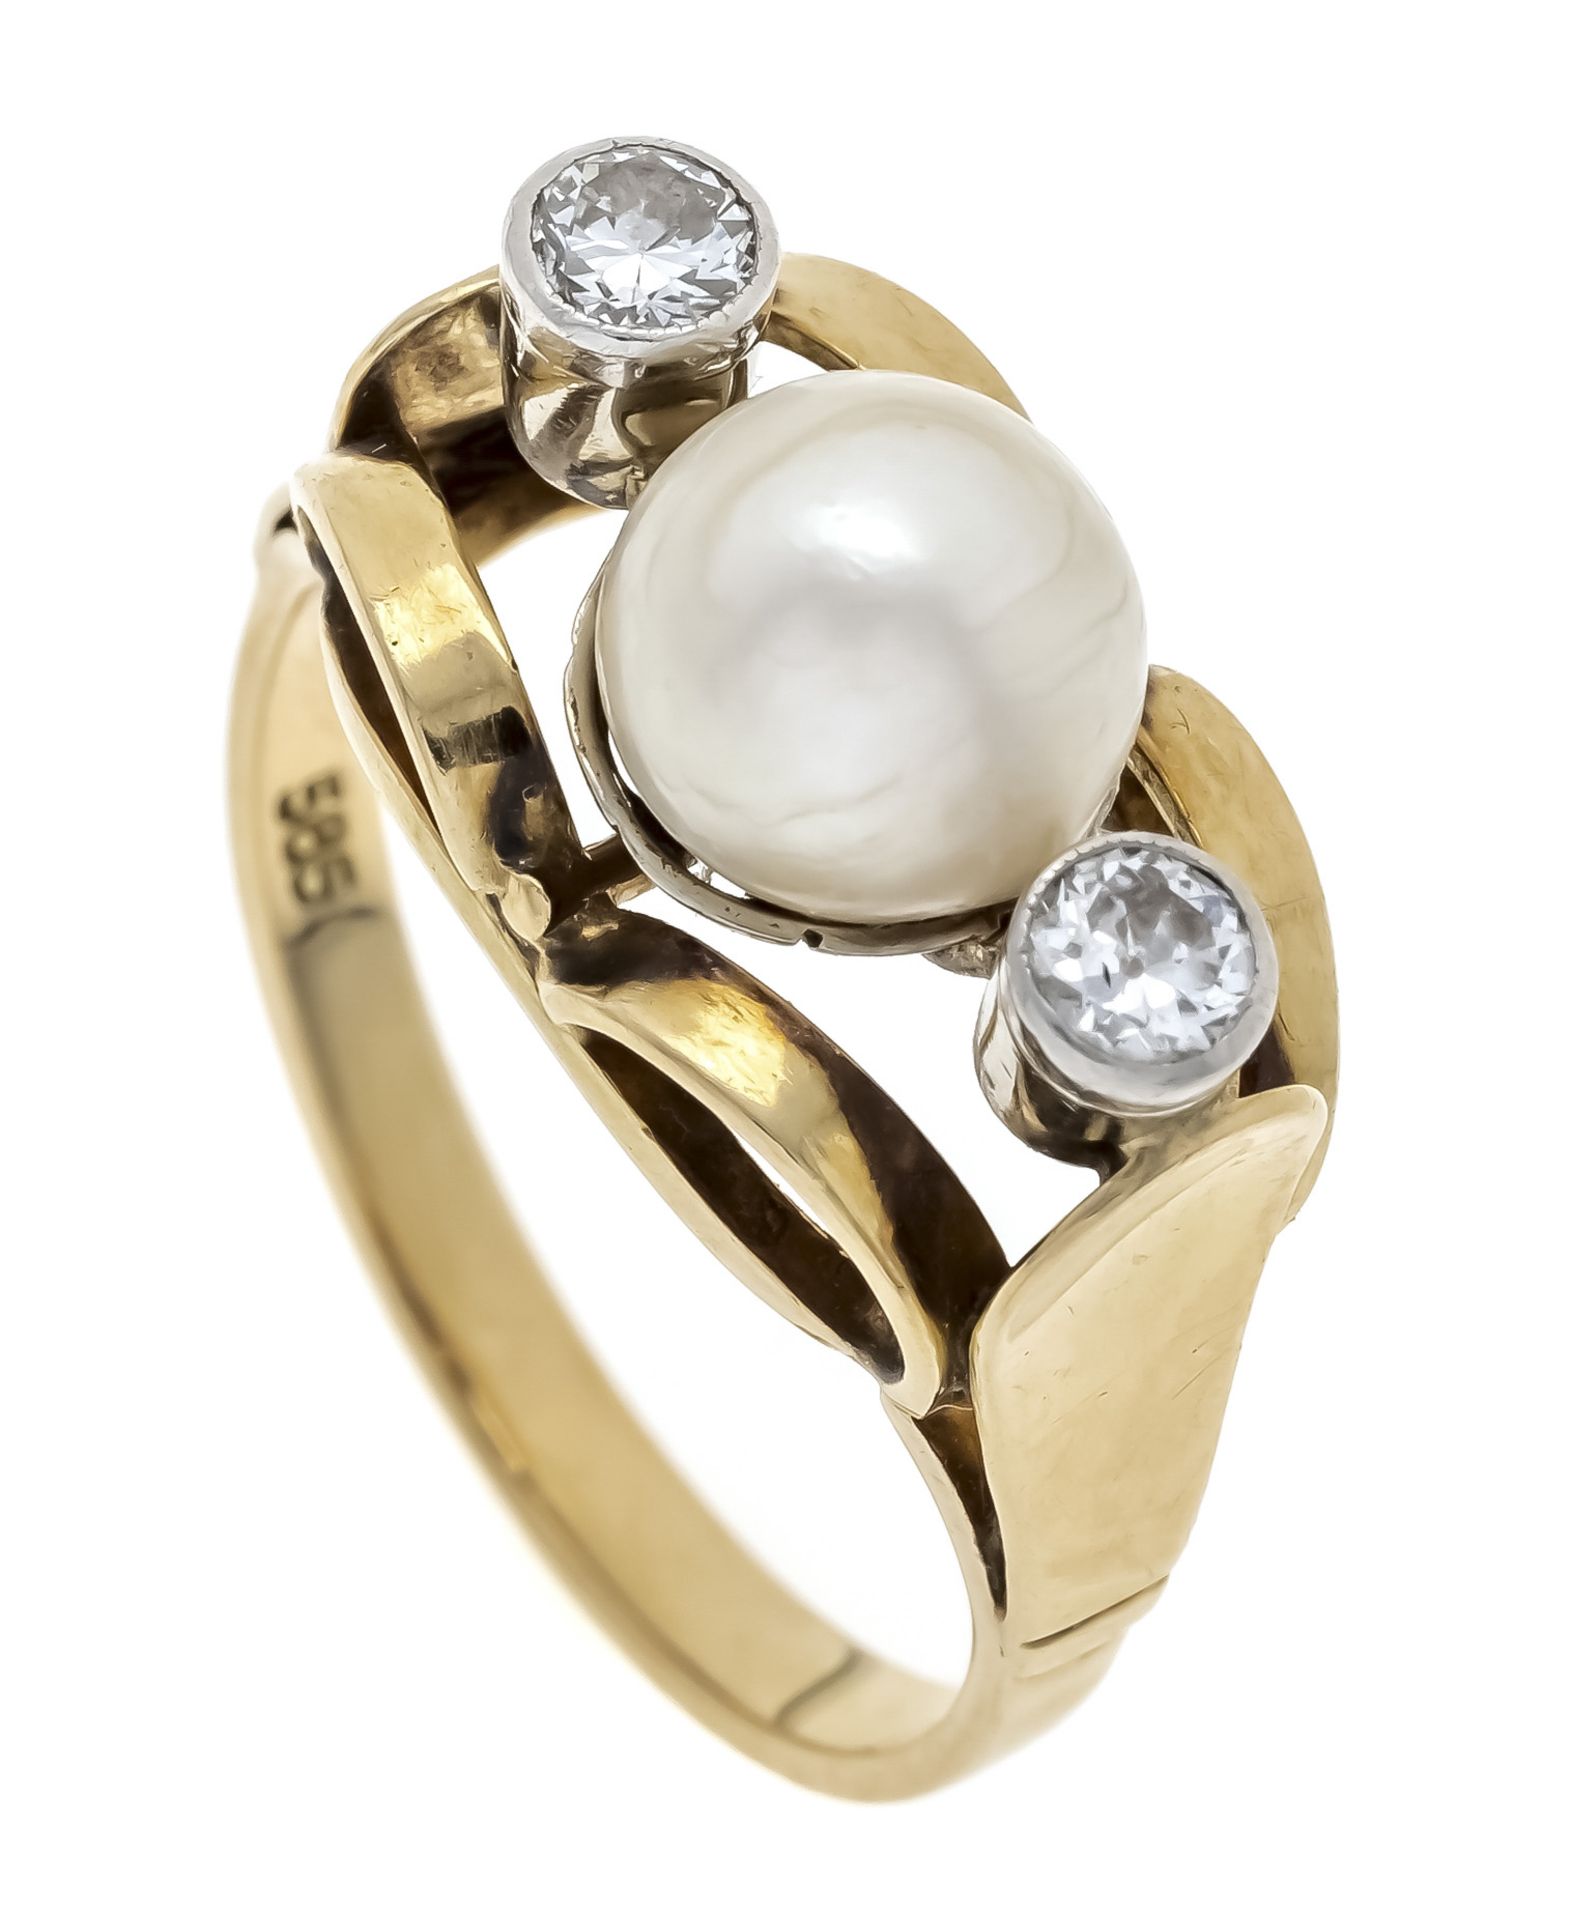 Old cut diamond pearl ring GG/WG 585/000 with one creamy white cultured pearl 7,2 mm and 2 old cut